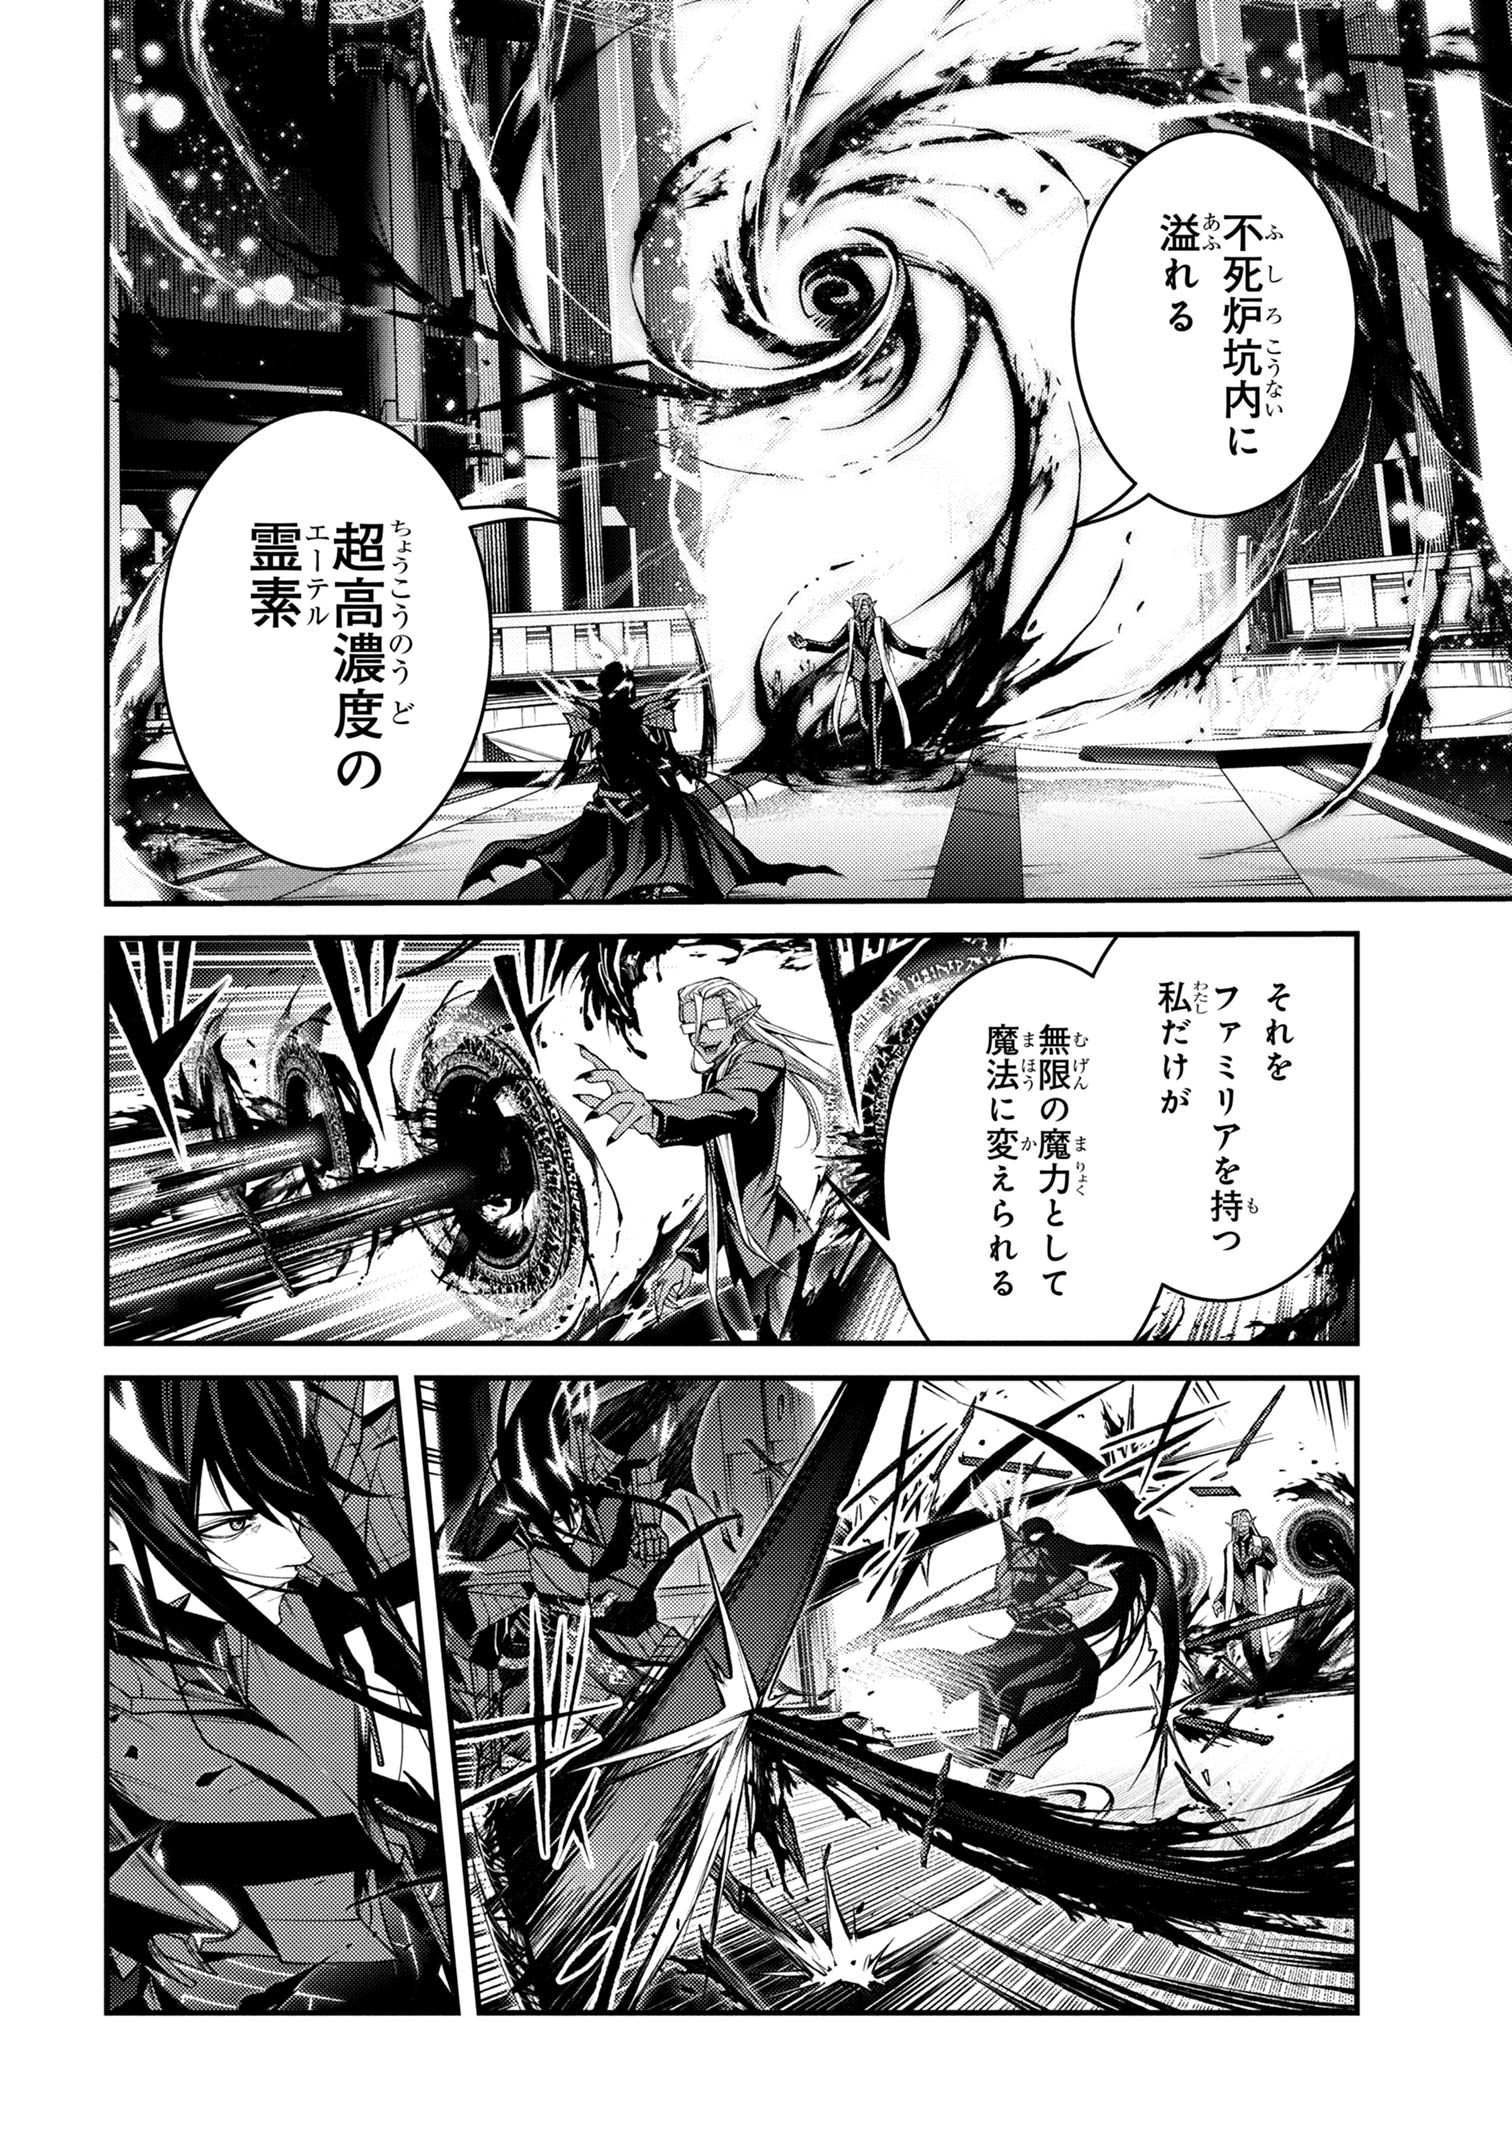 Maou 2099 - Chapter 11.1 - Page 12